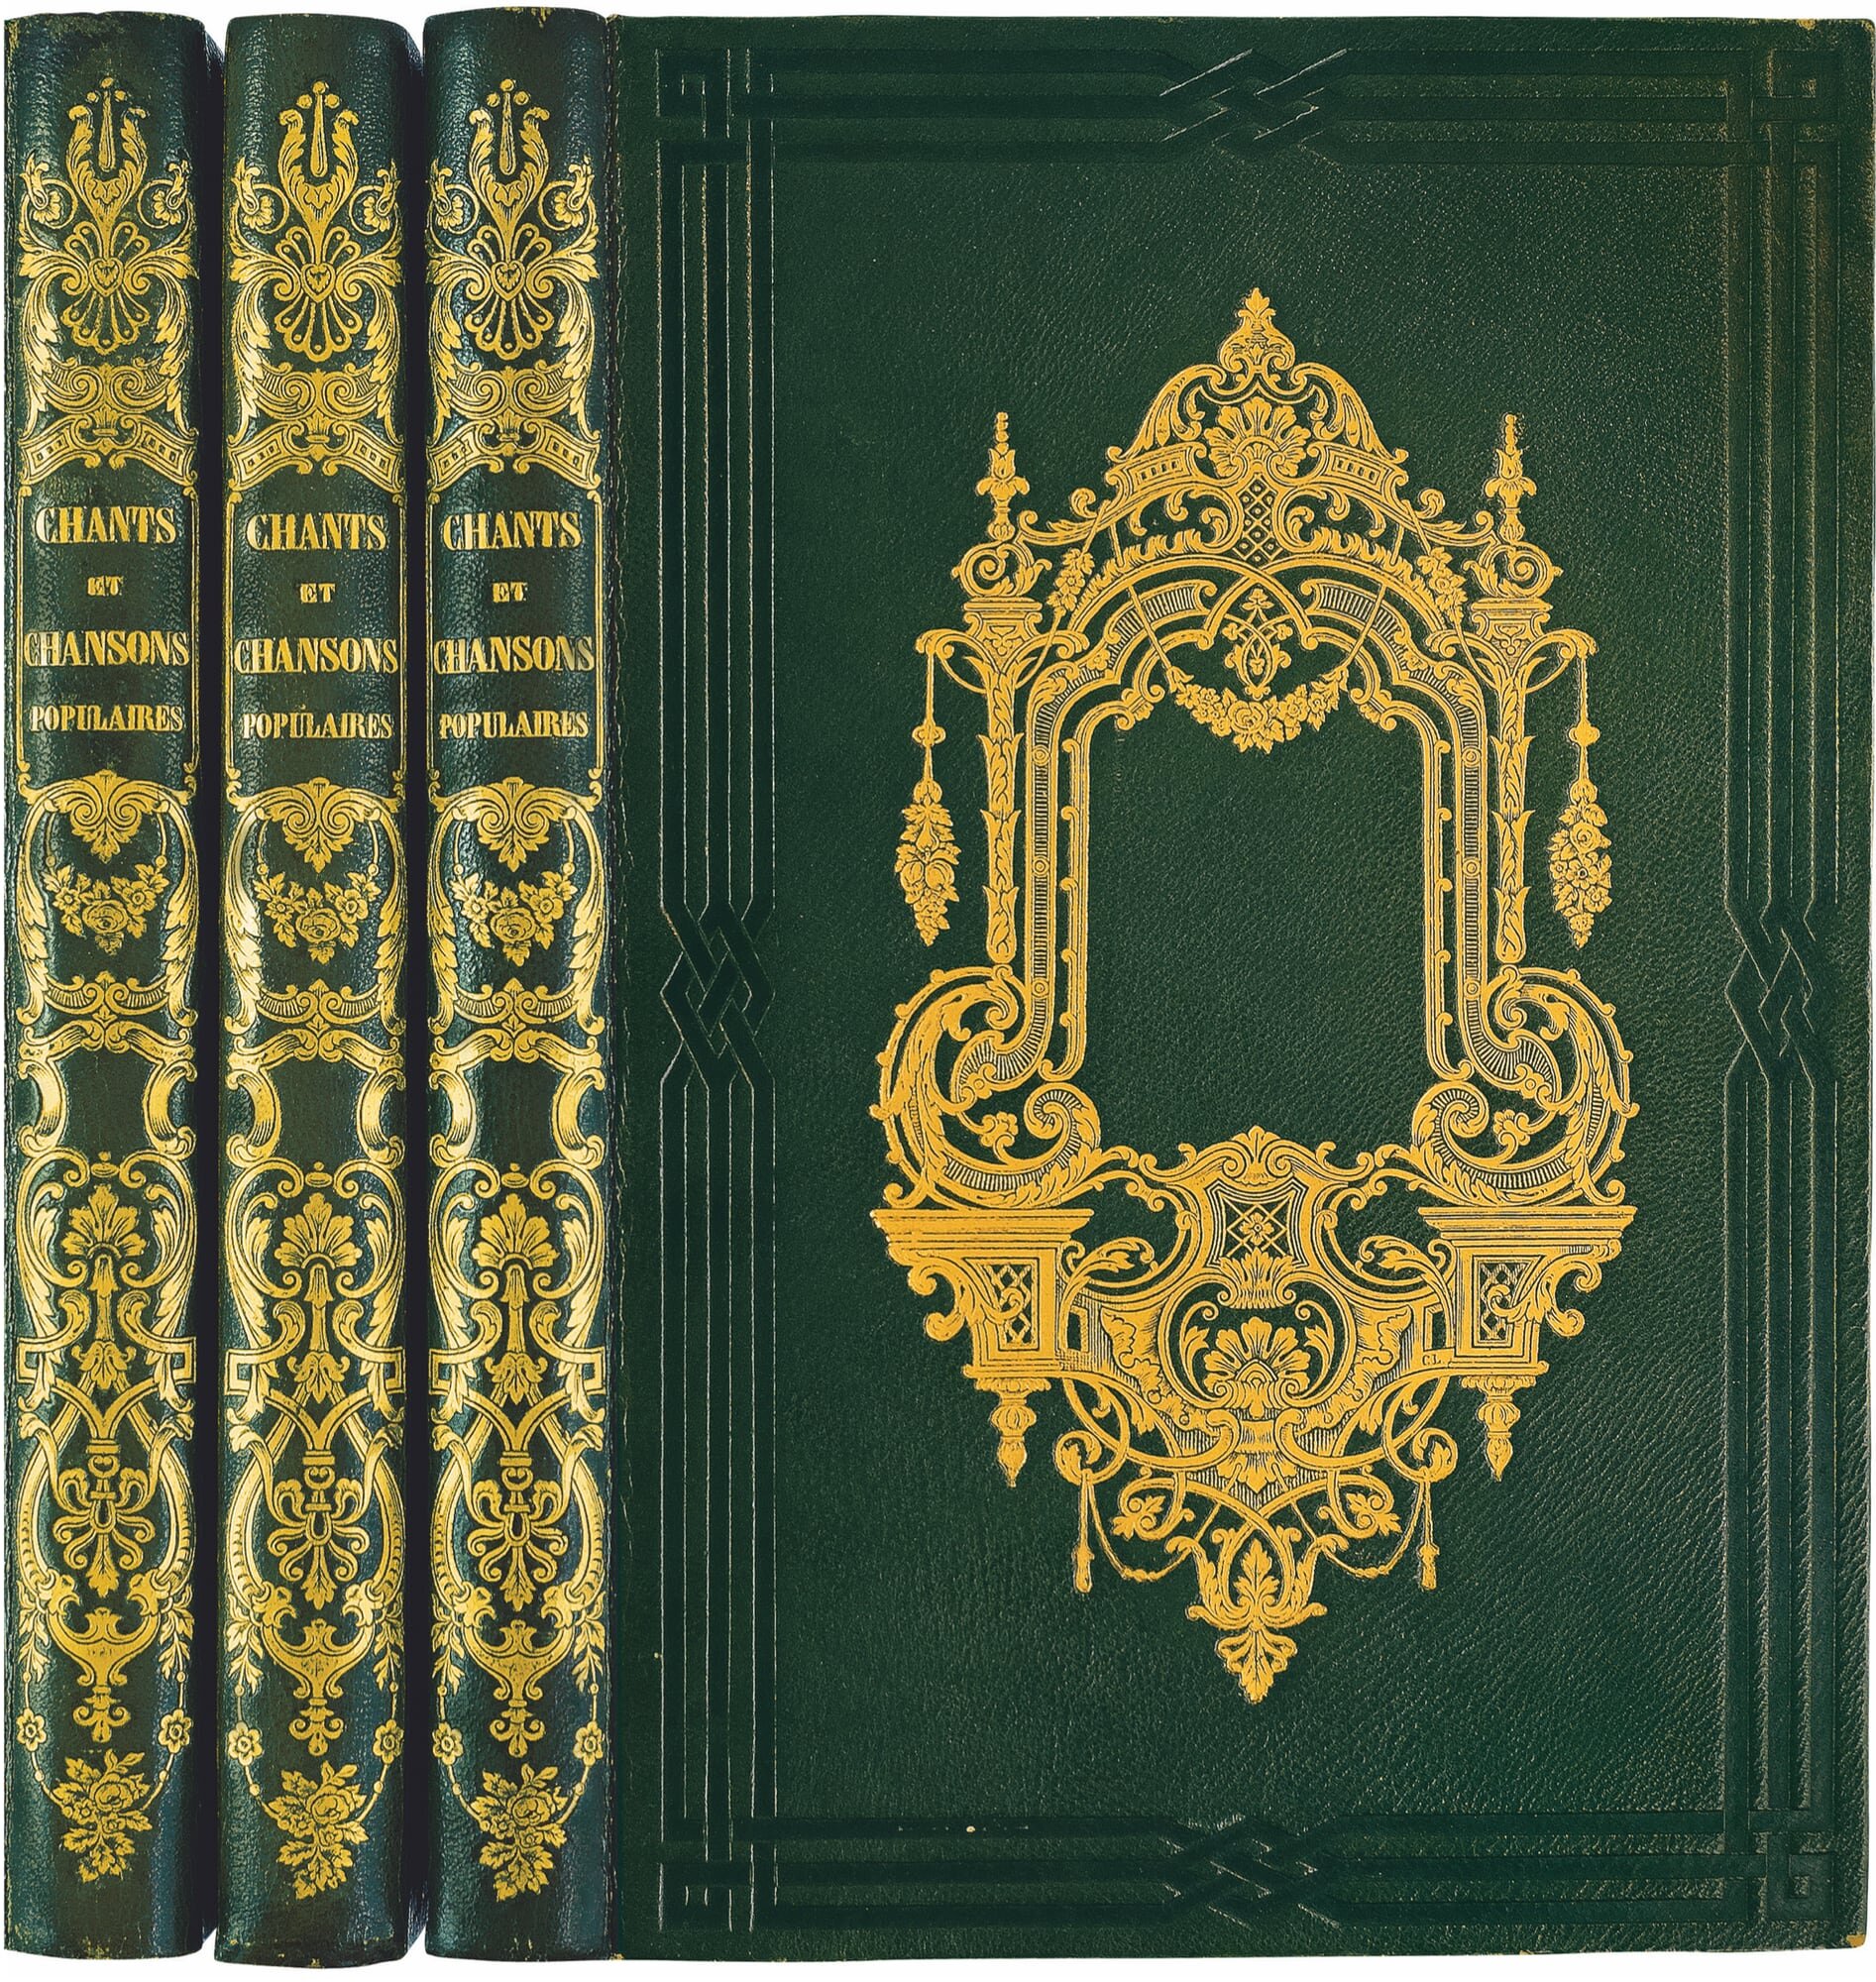  A variation of Boutigny's luxury publisher’s bindings in dark green morocco [no. 118], to which 71 drawings, mostly by Steinheil and Trimolet, were added, as well as 54 unique proofs of the song lyrics on large China paper. 